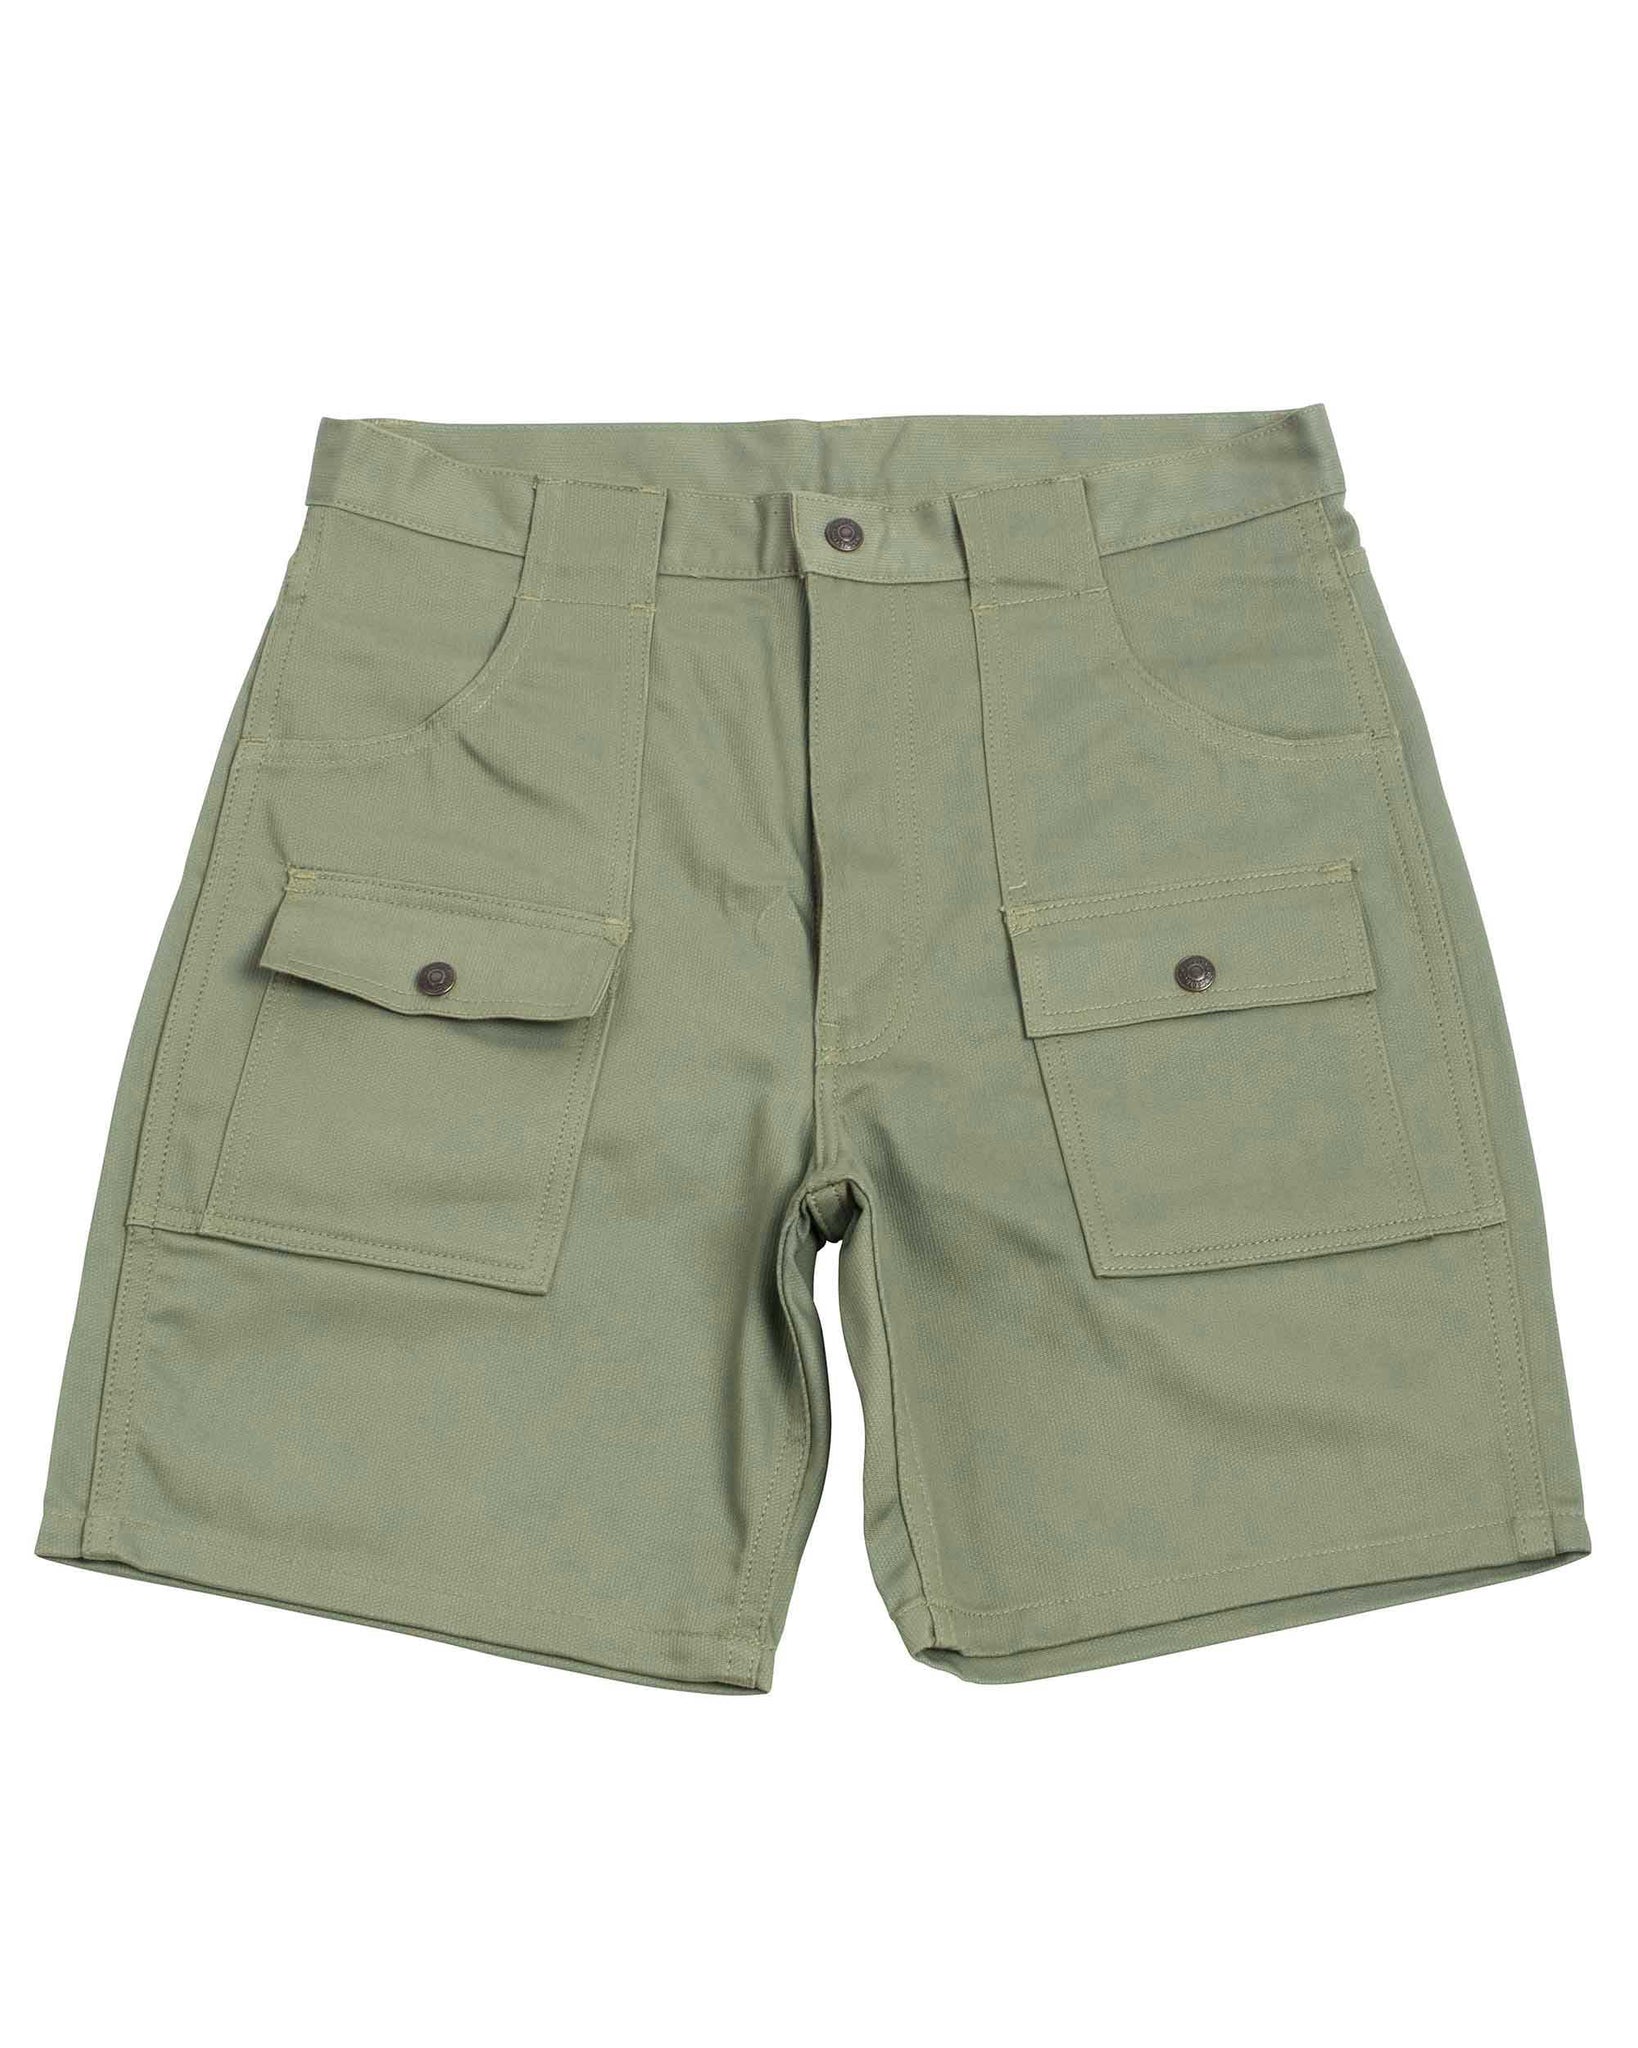 The Real McCoy's MP22013 Outdoor Utility Shorts / Pique Sage